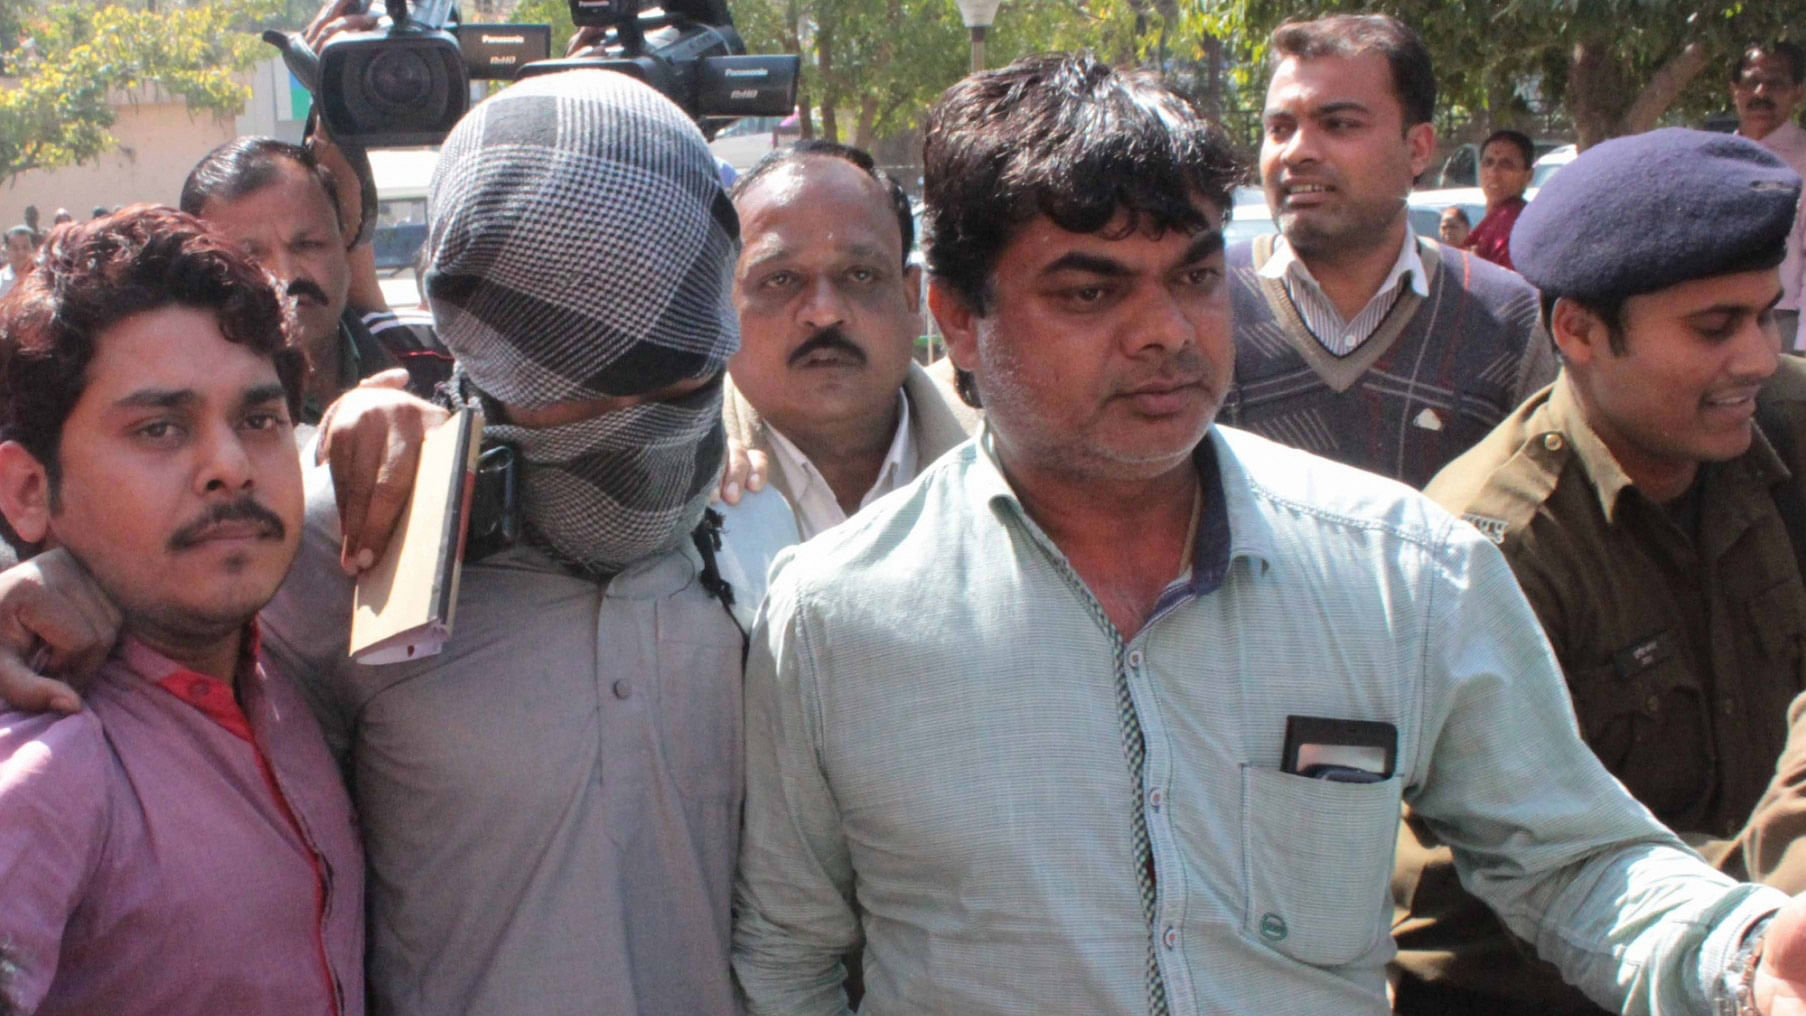 

Azhar Iqbal a terror suspect having alleged links with Islamic State terrorist outfit who were arrested by NIA being produce at a court in Bhopal on Feb 2, 2016. (Photo: IANS)